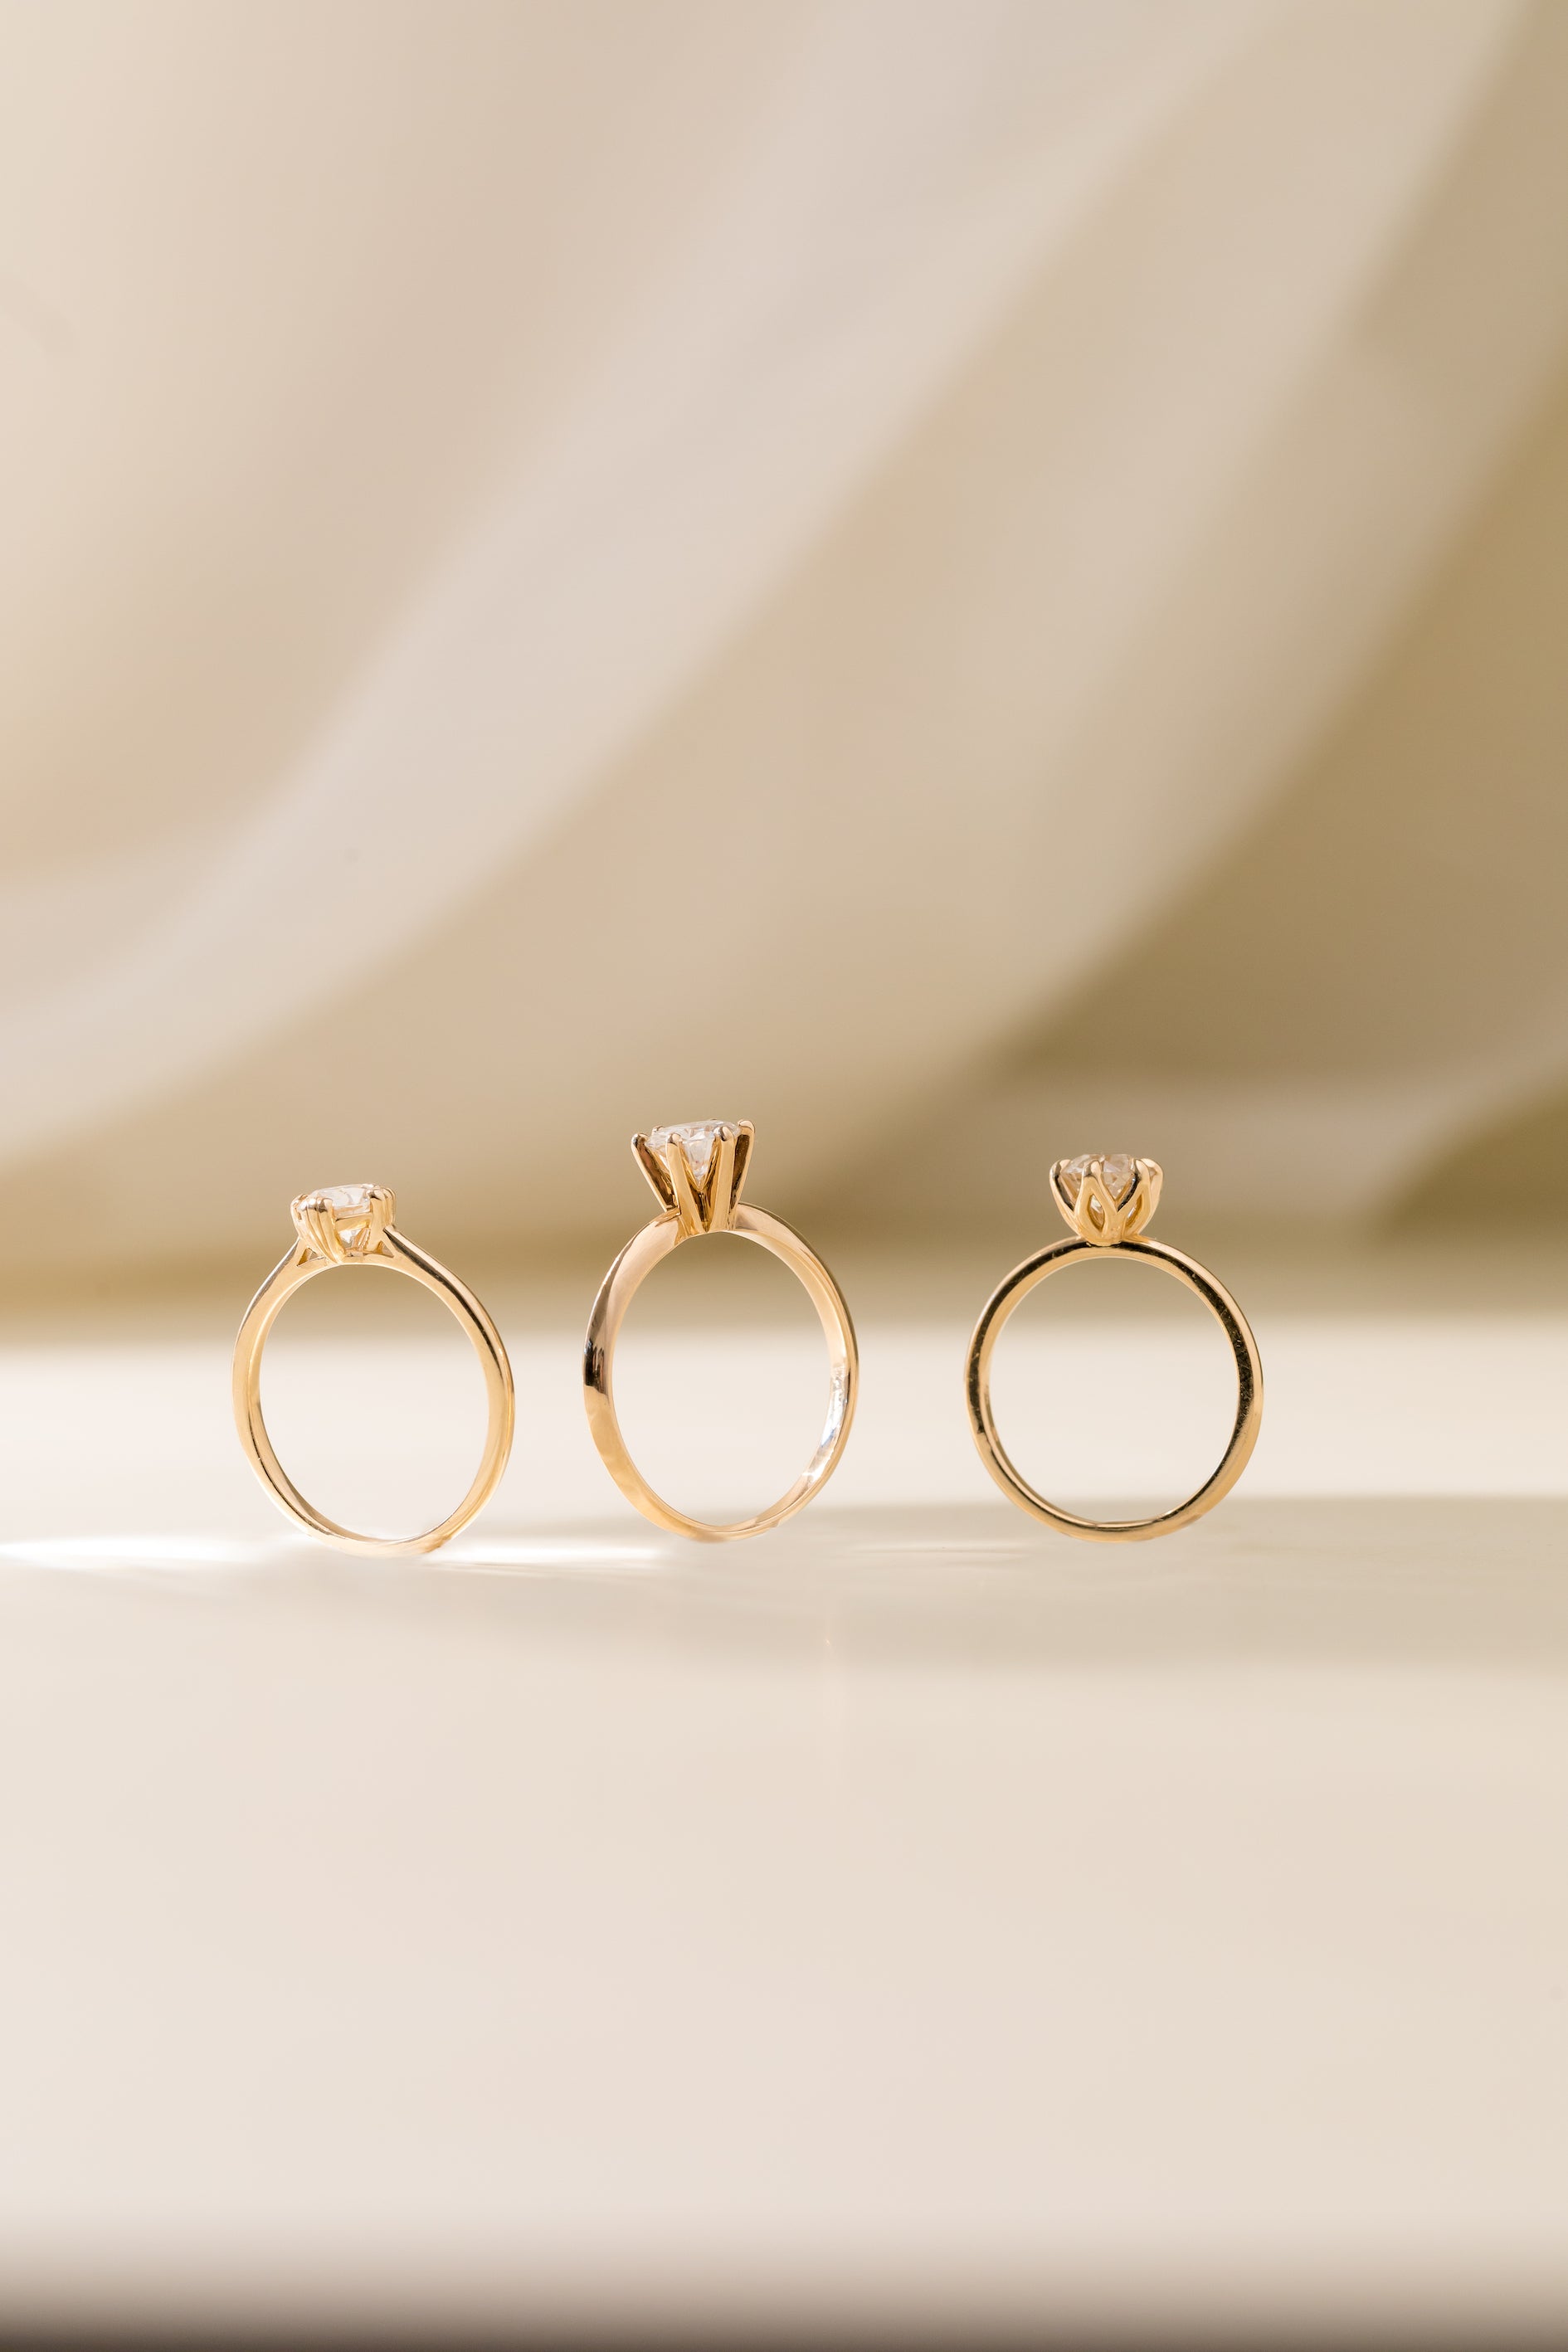 A shopping guide to the best … gold rings | Life and style | The Guardian